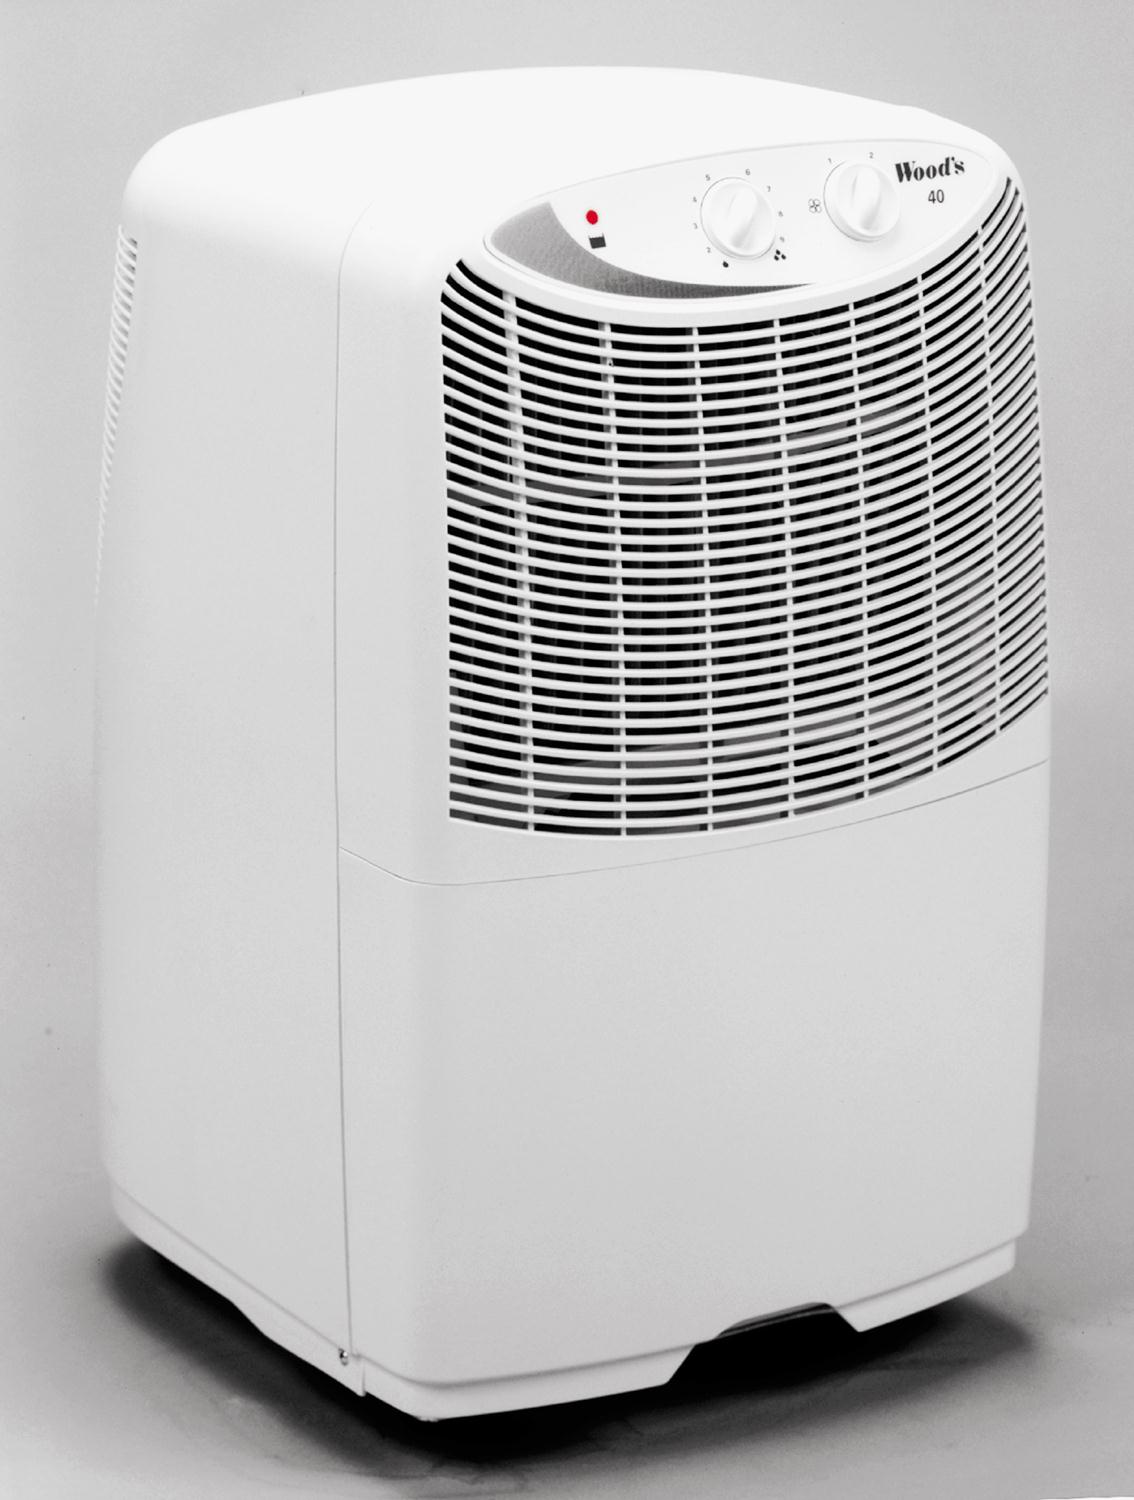 CPSC, W.C. Wood Company Announce Recall of Dehumidifiers | CPSC.gov